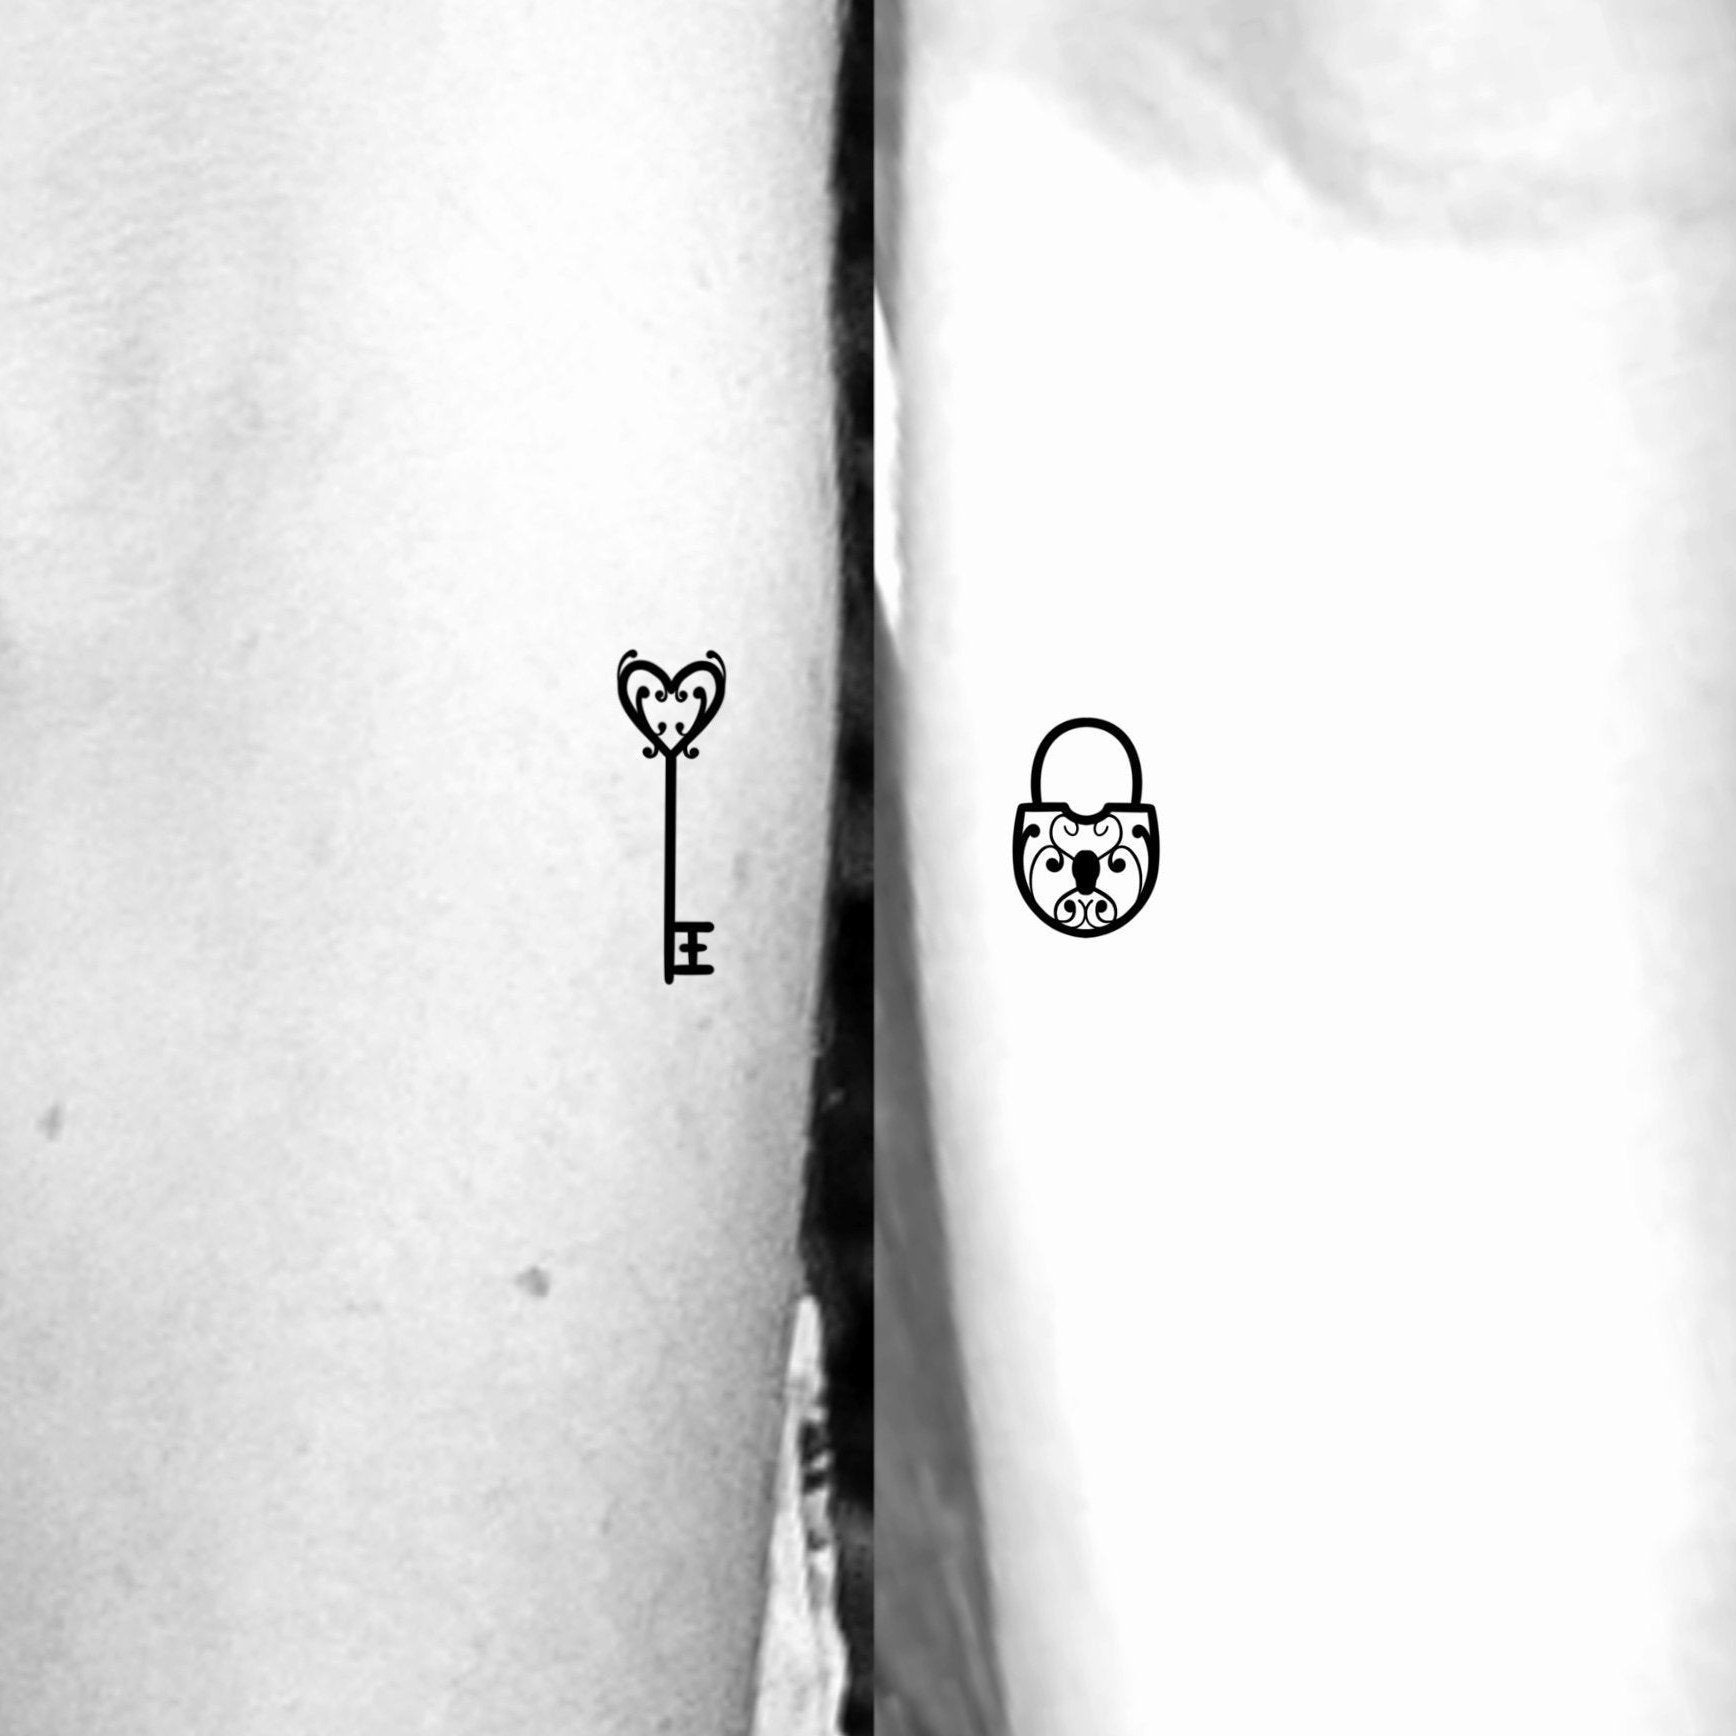 15 Unique Key Tattoo Designs for Inspiration | Styles At Life